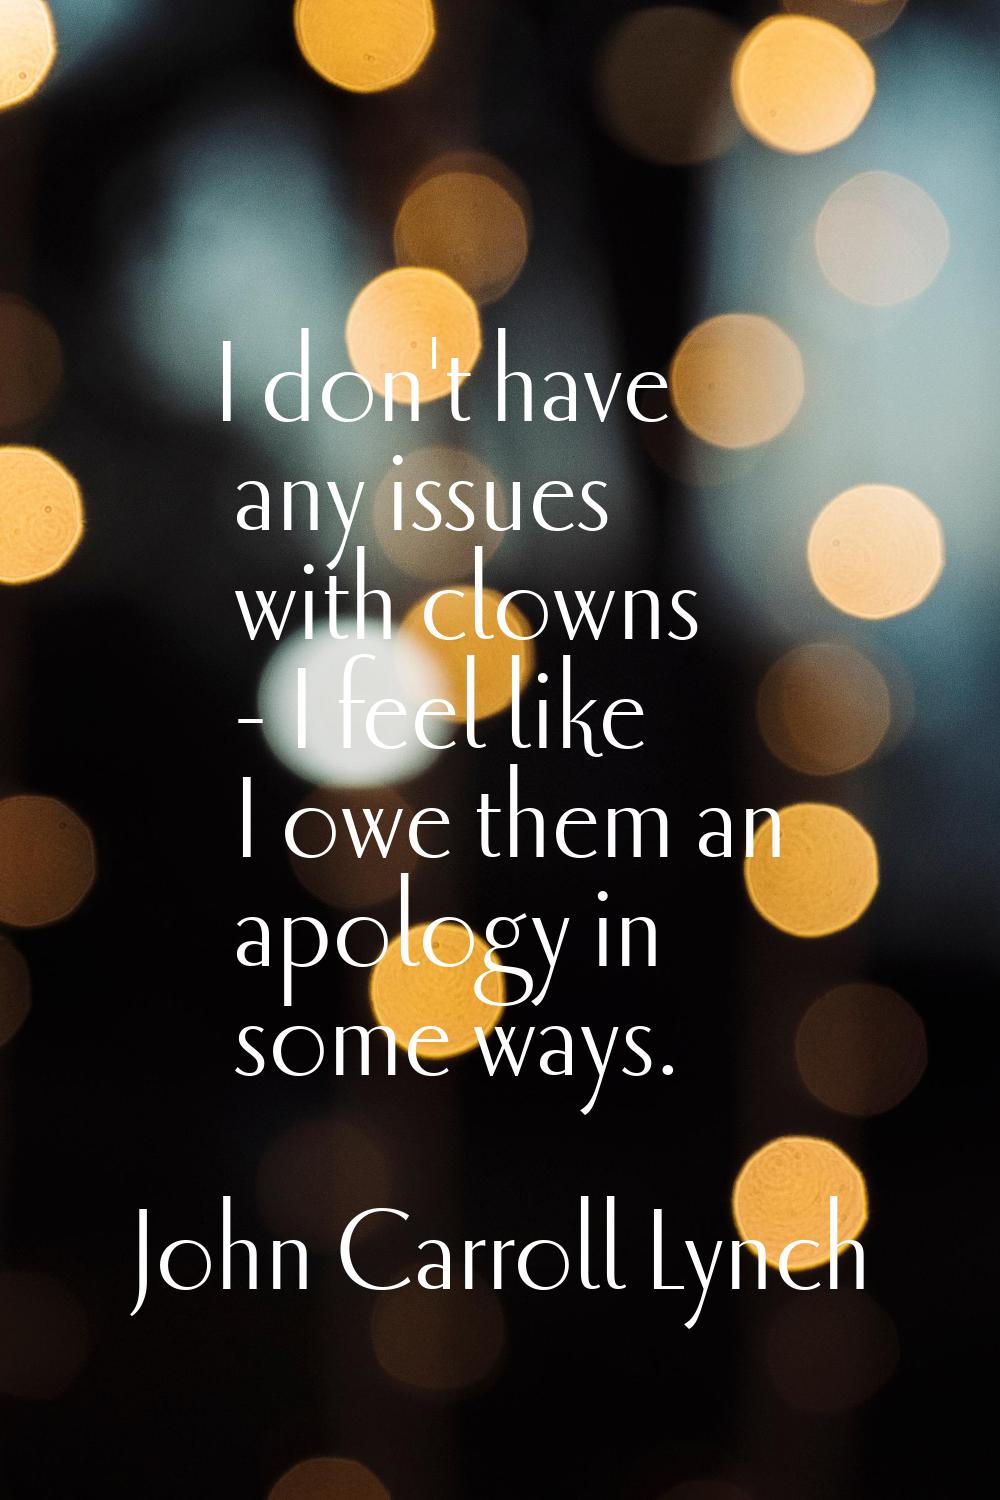 I don't have any issues with clowns - I feel like I owe them an apology in some ways.